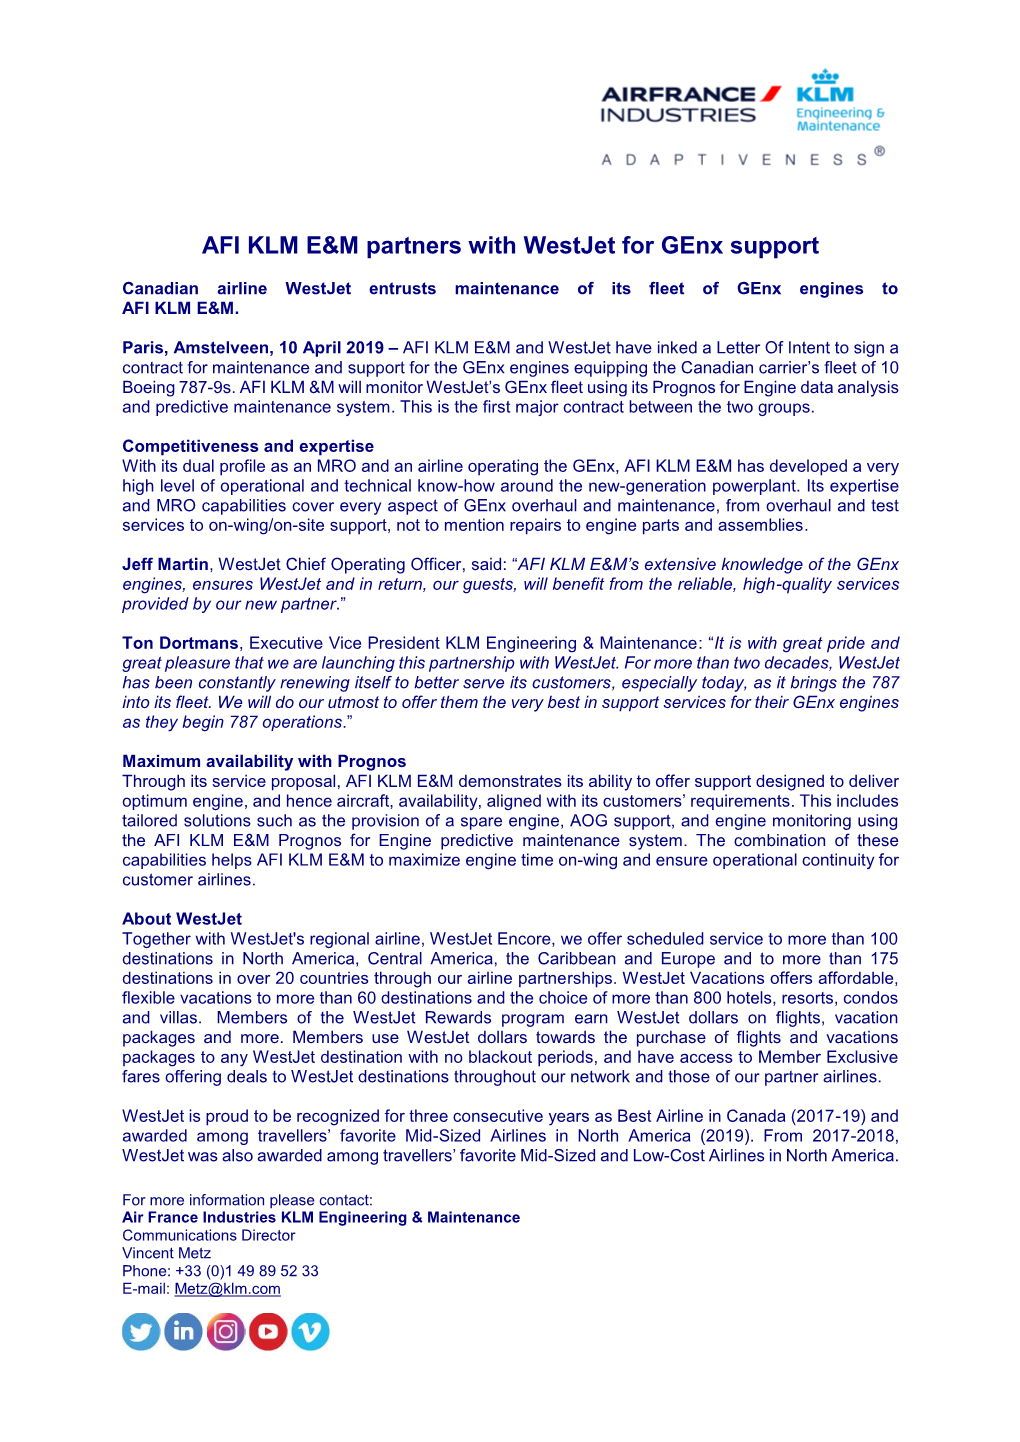 AFI KLM E&M Partners with Westjet for Genx Support